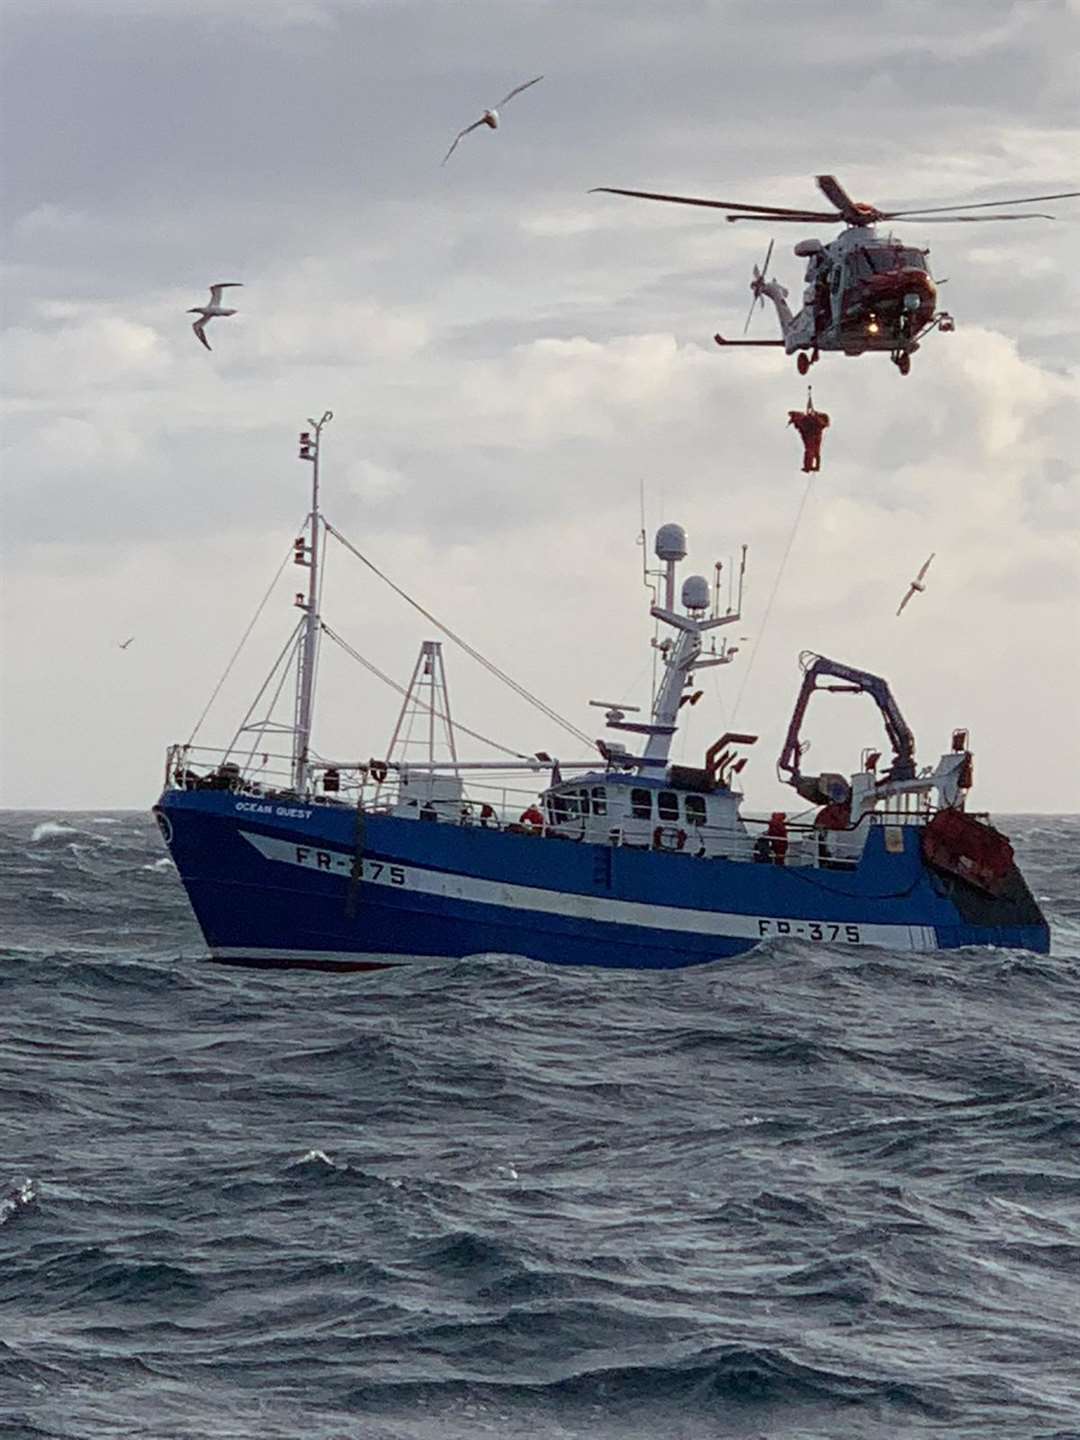 The crew were winched to safety from the floundering vessel (MAIB/PA)